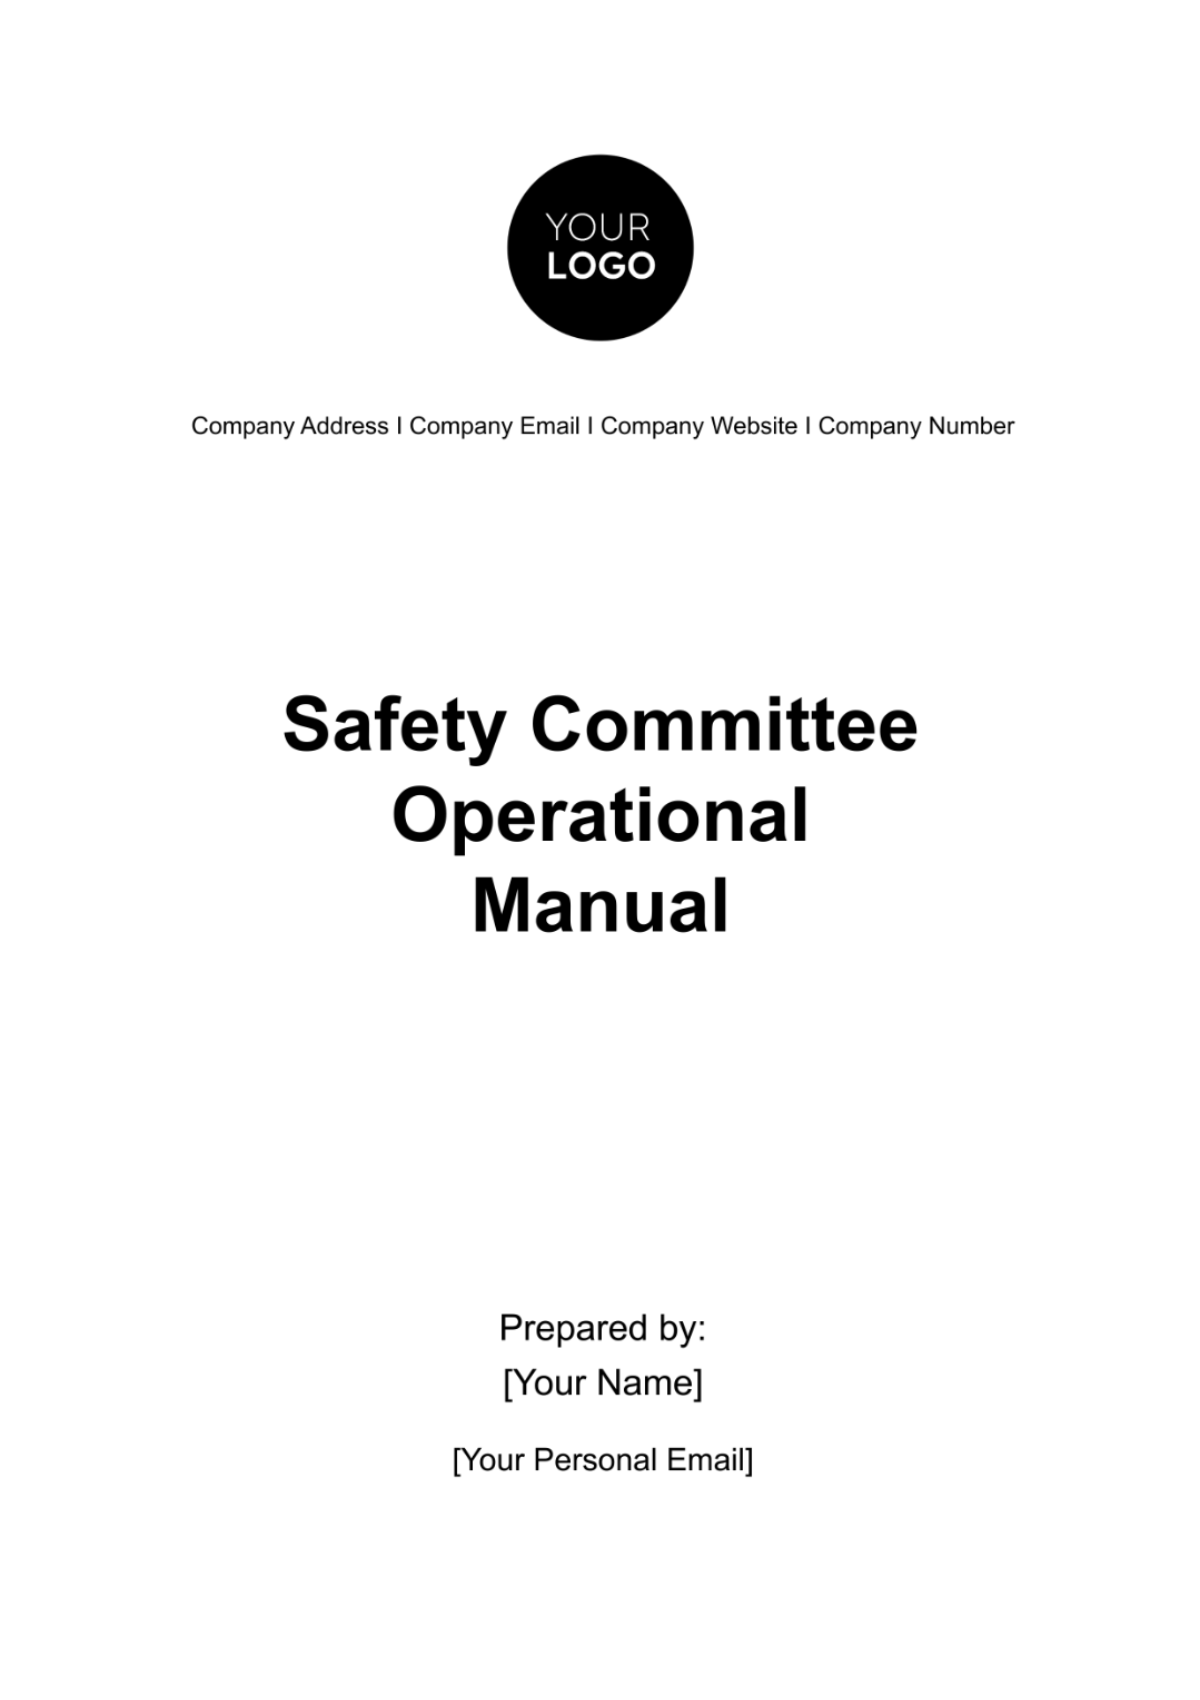 Free Safety Committee Operational Manual HR Template